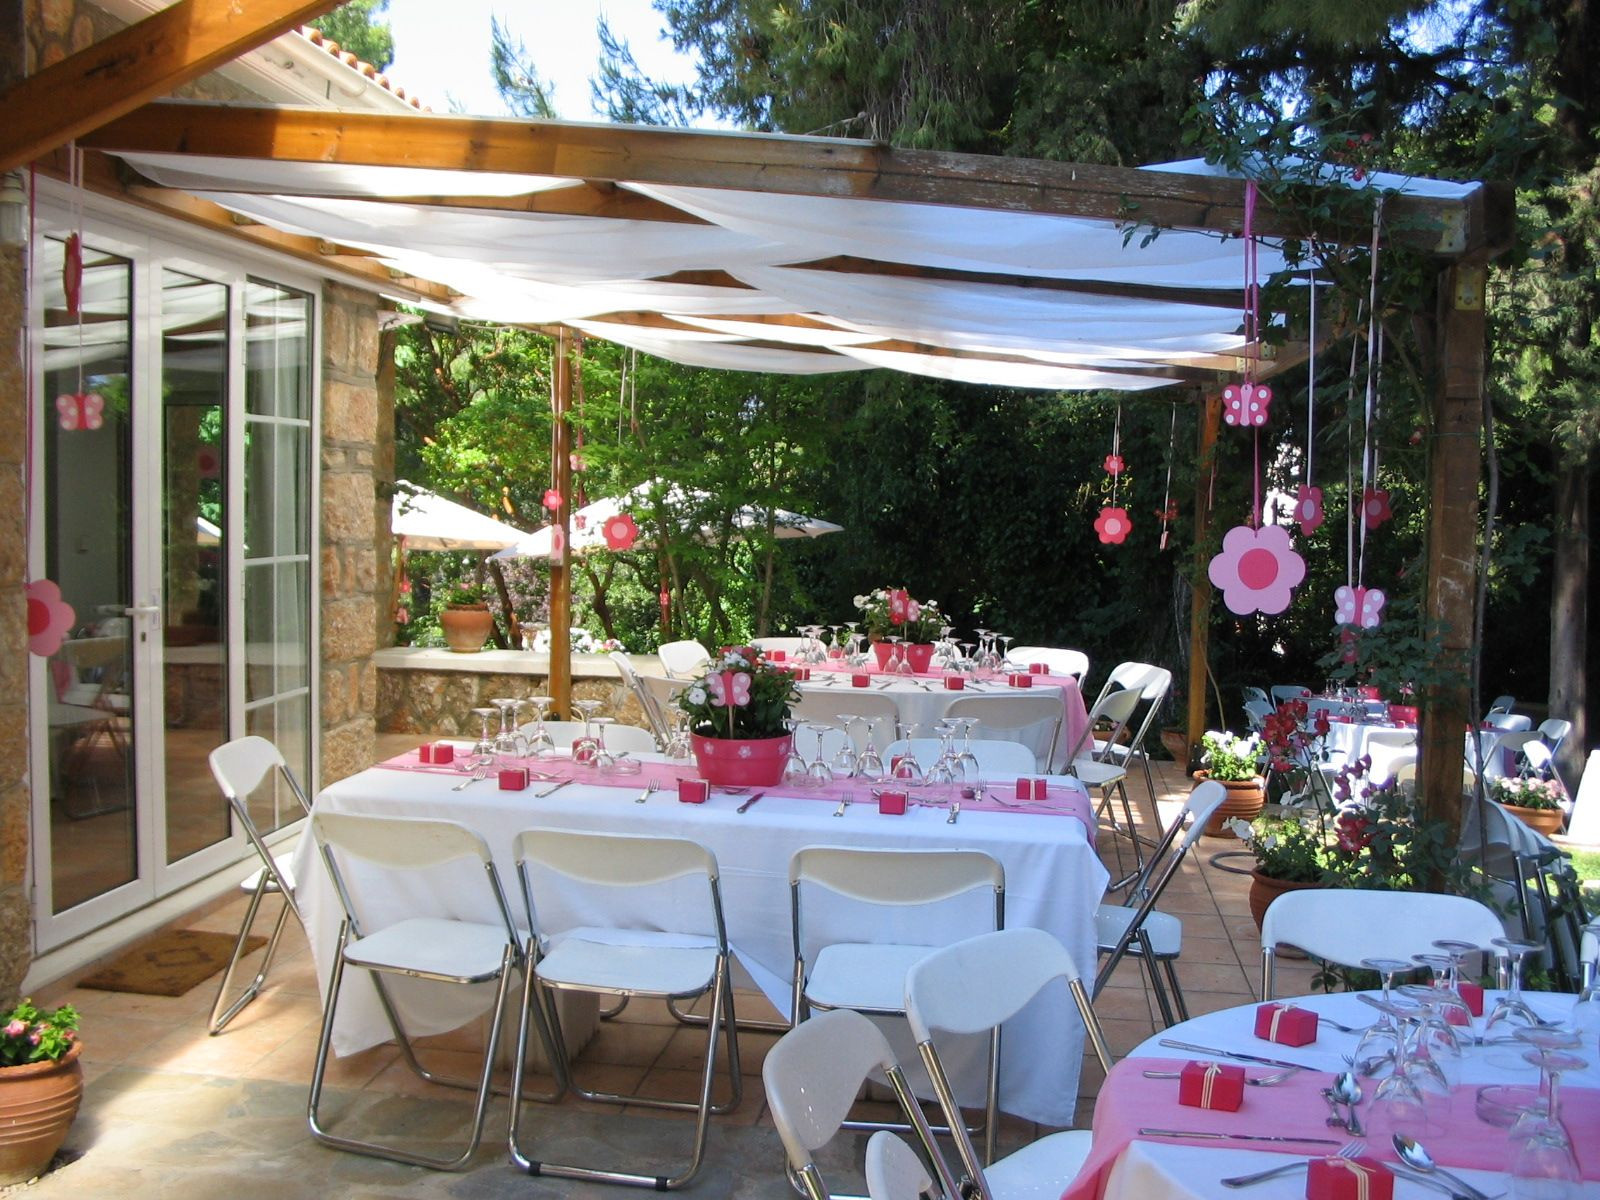 Backyard Baptism Party Ideas
 outdoor baptism party ideas D With images